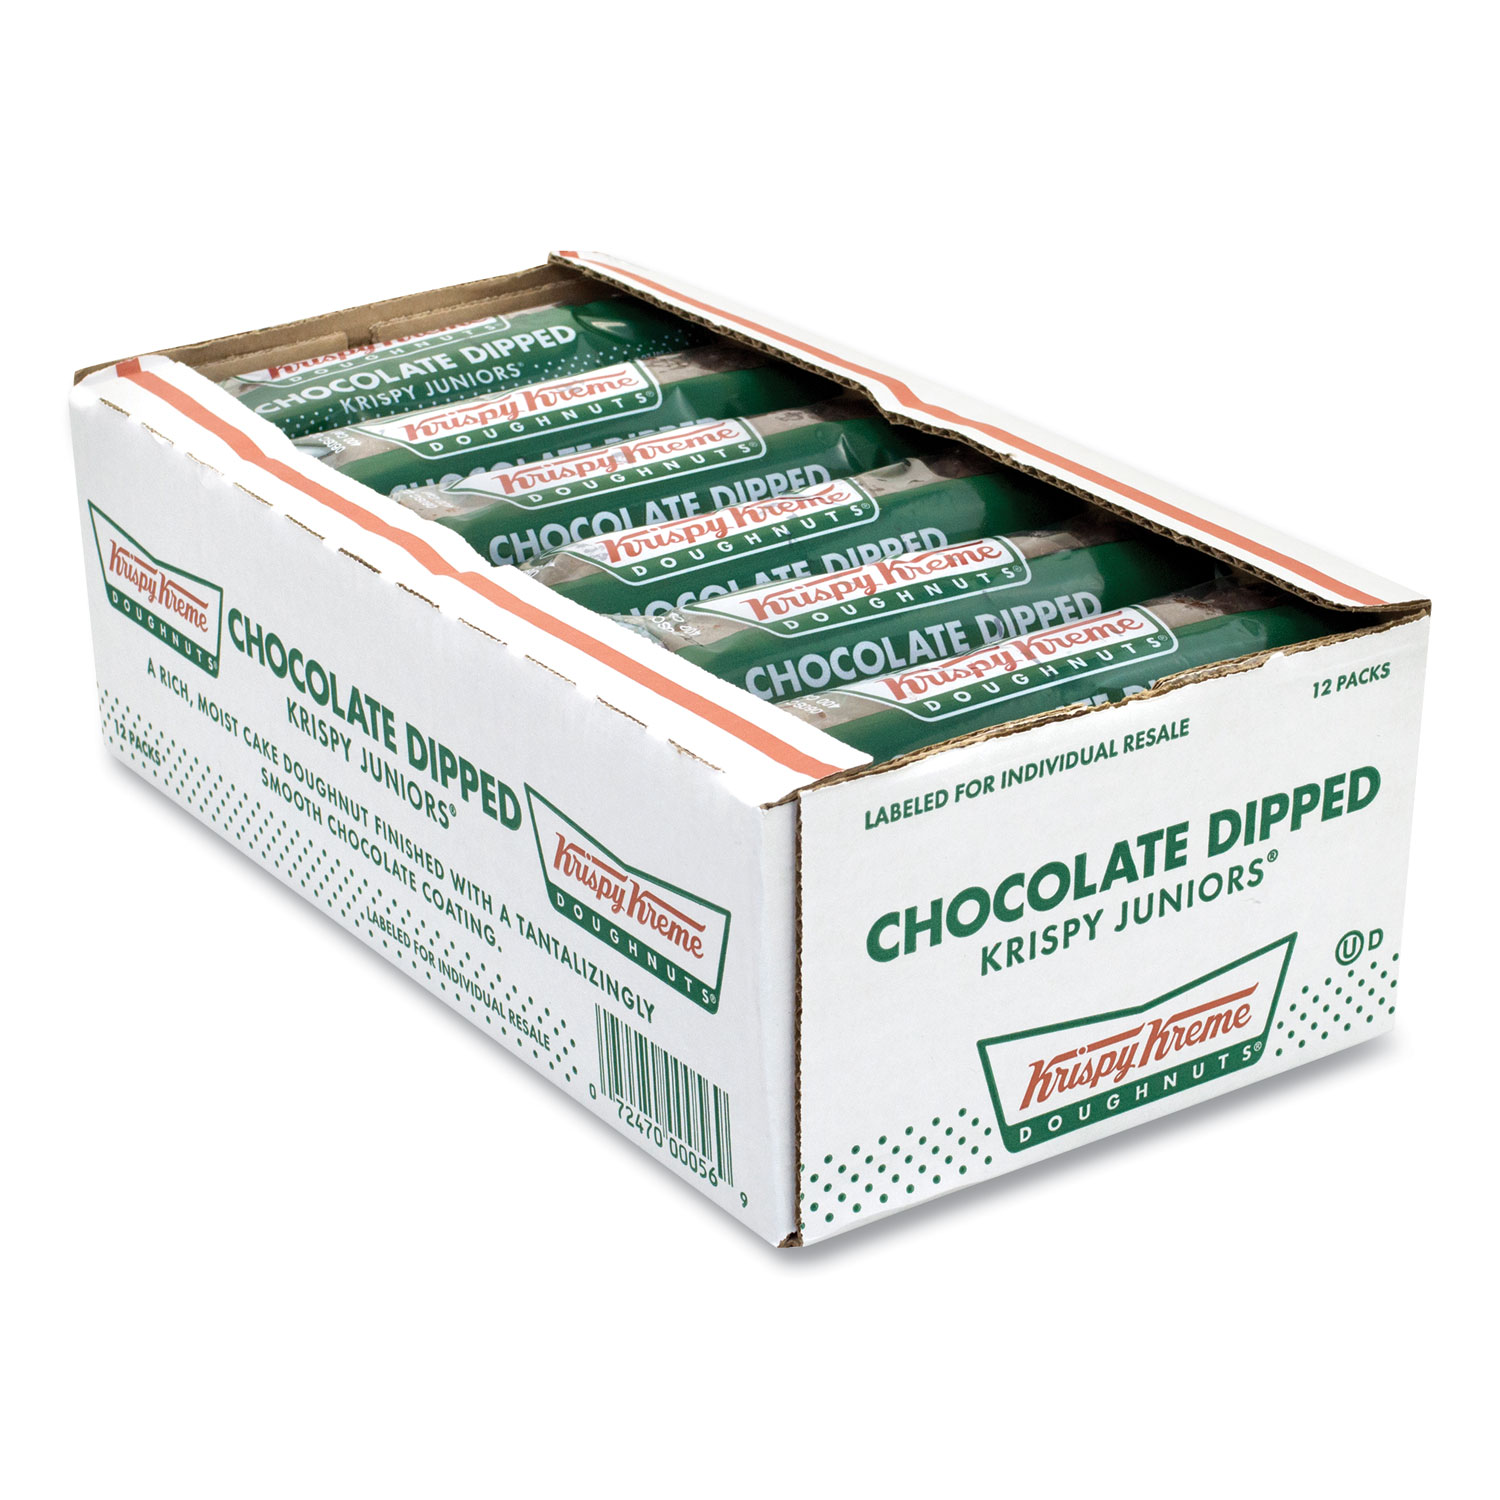  Krispy Kreme GD101F Chocolate Dipped Doughnut, 3 oz Pack, 12 Packs/Box, Free Delivery in 1-4 Business Days (GRR90300109) 